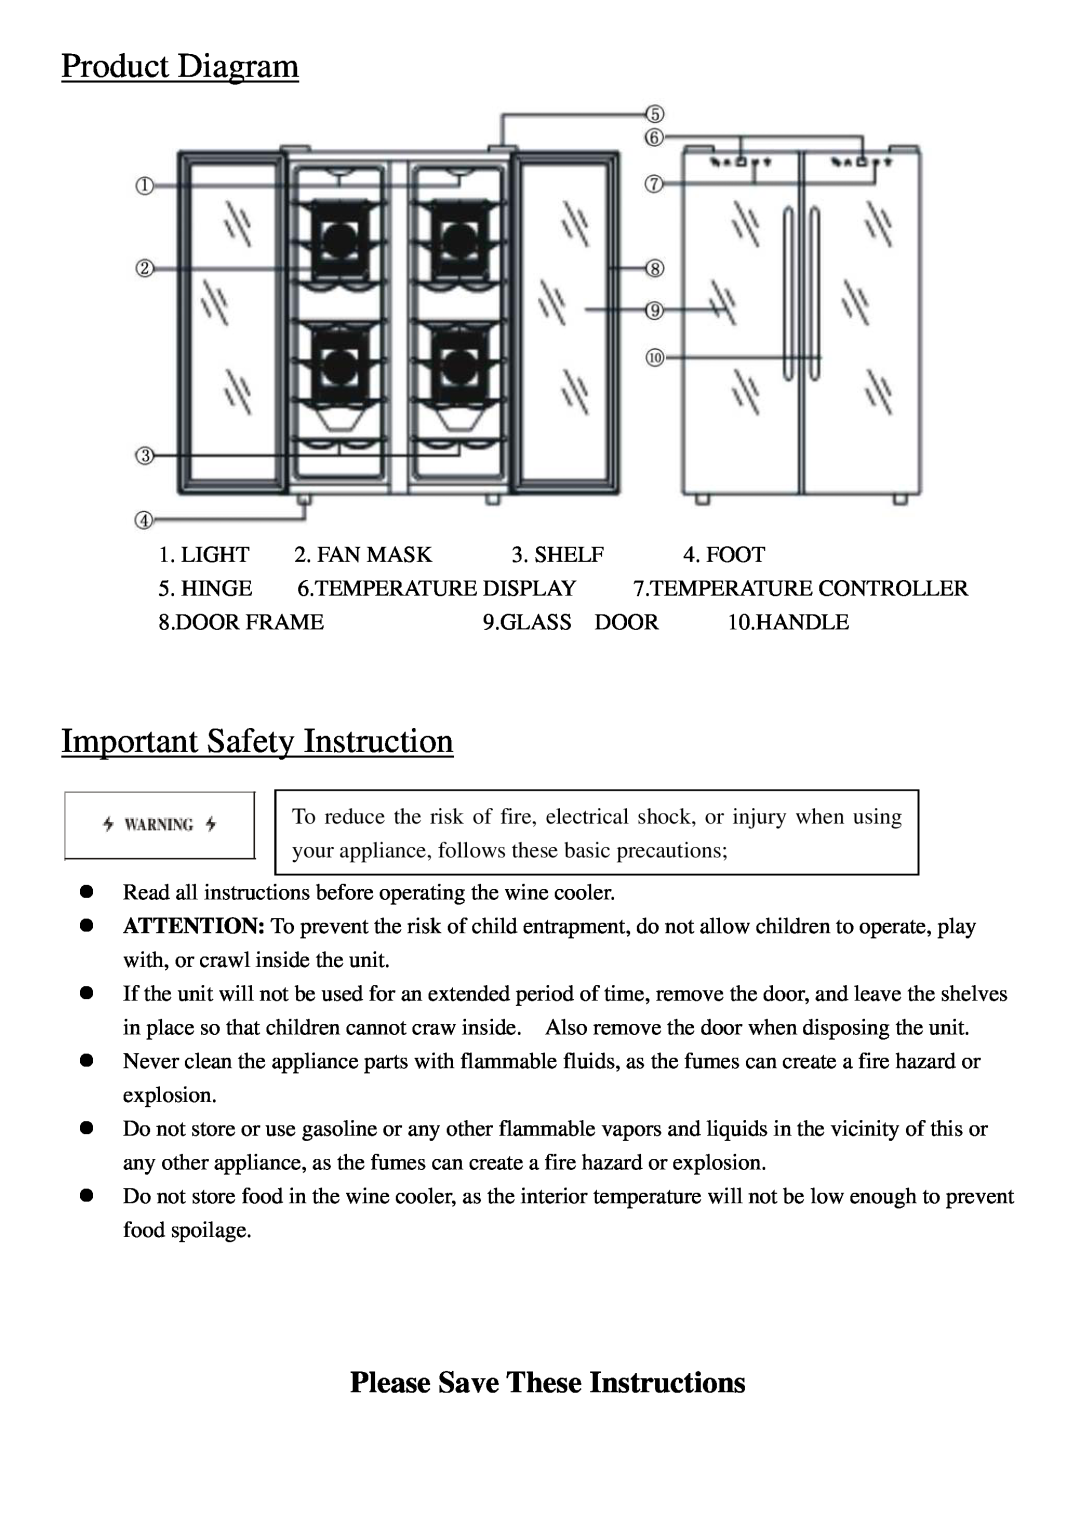 NewAir AW-320ED instruction manual Product Diagram, Important Safety Instruction, Please Save These Instructions 